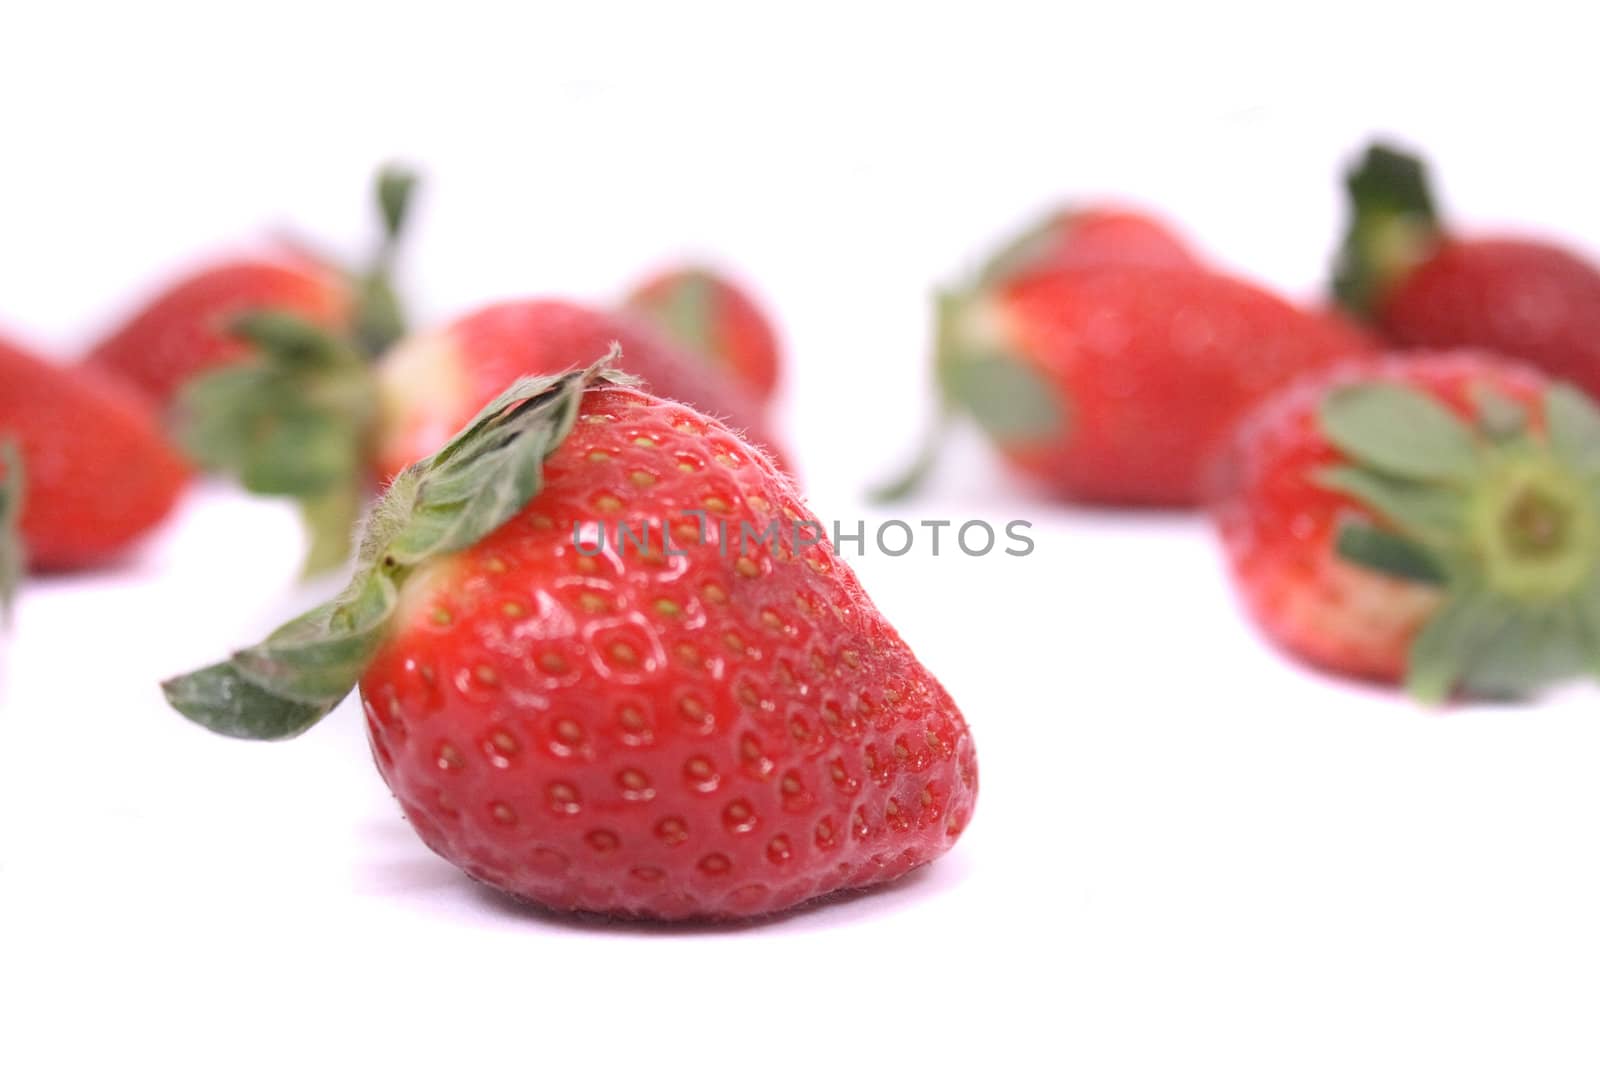 fresh red strawberries on the white background